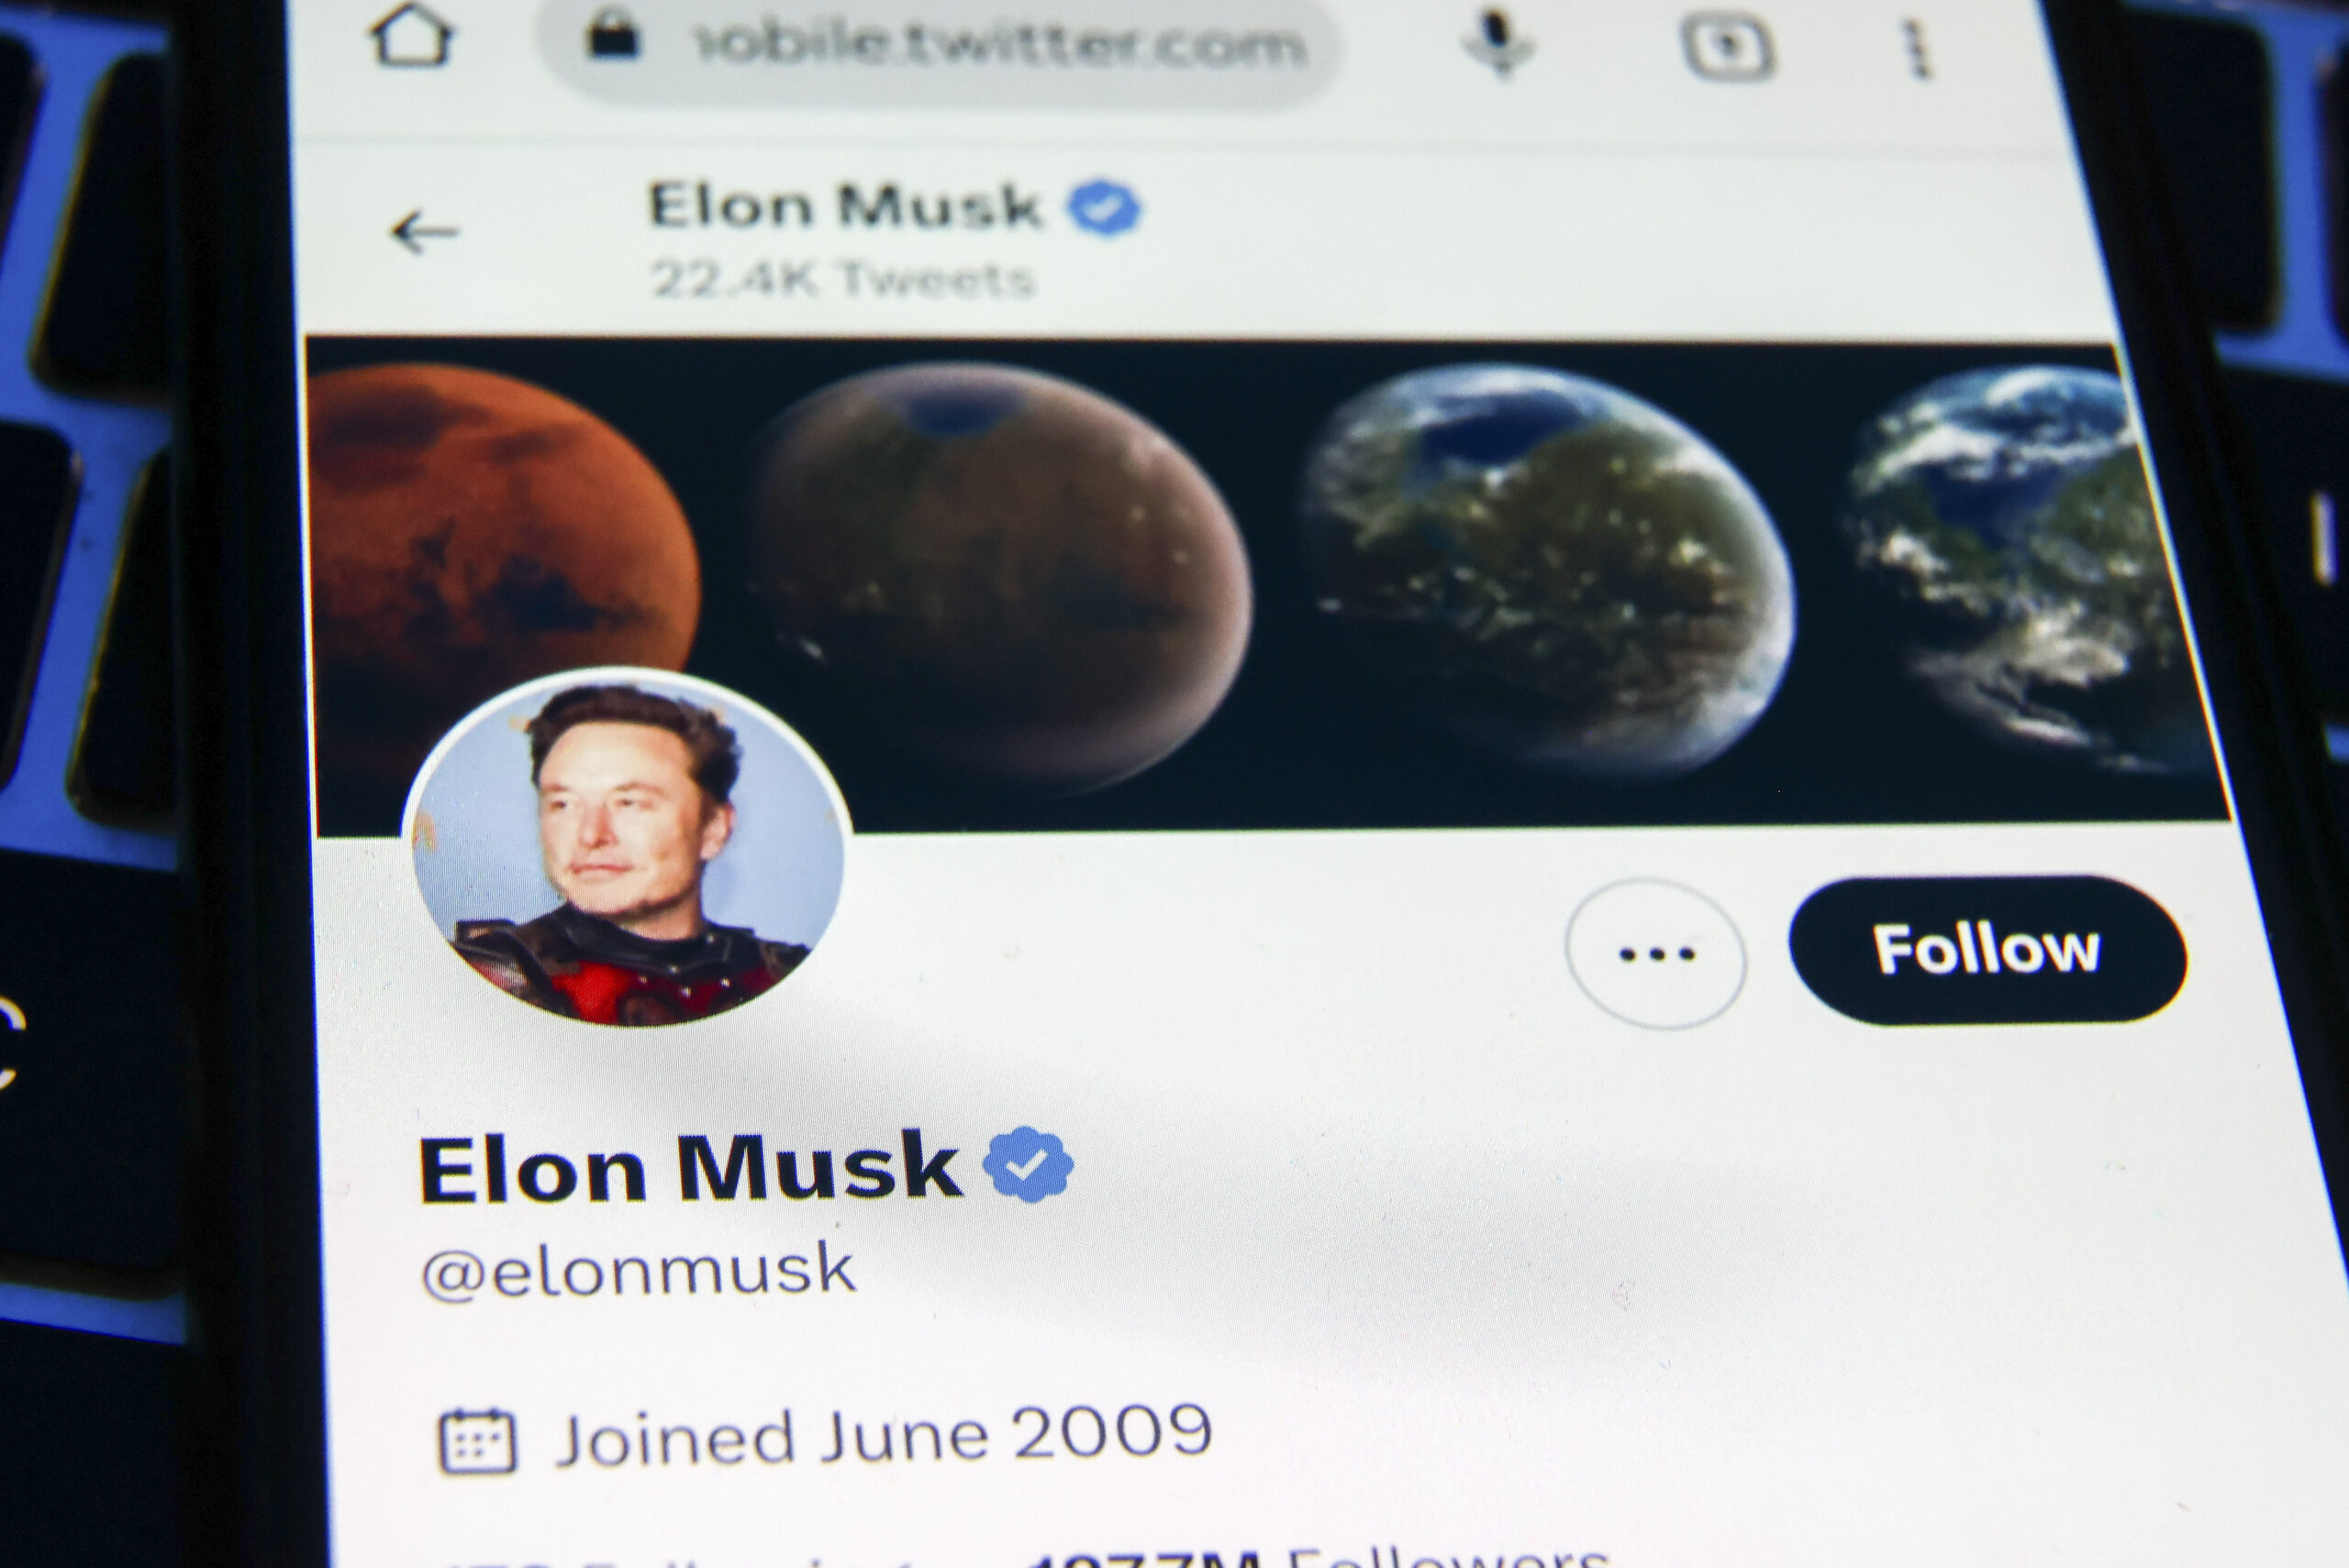 Elon Musk reveals that he is” personally” paying three celebrities to maintain their good looks on Twitter.